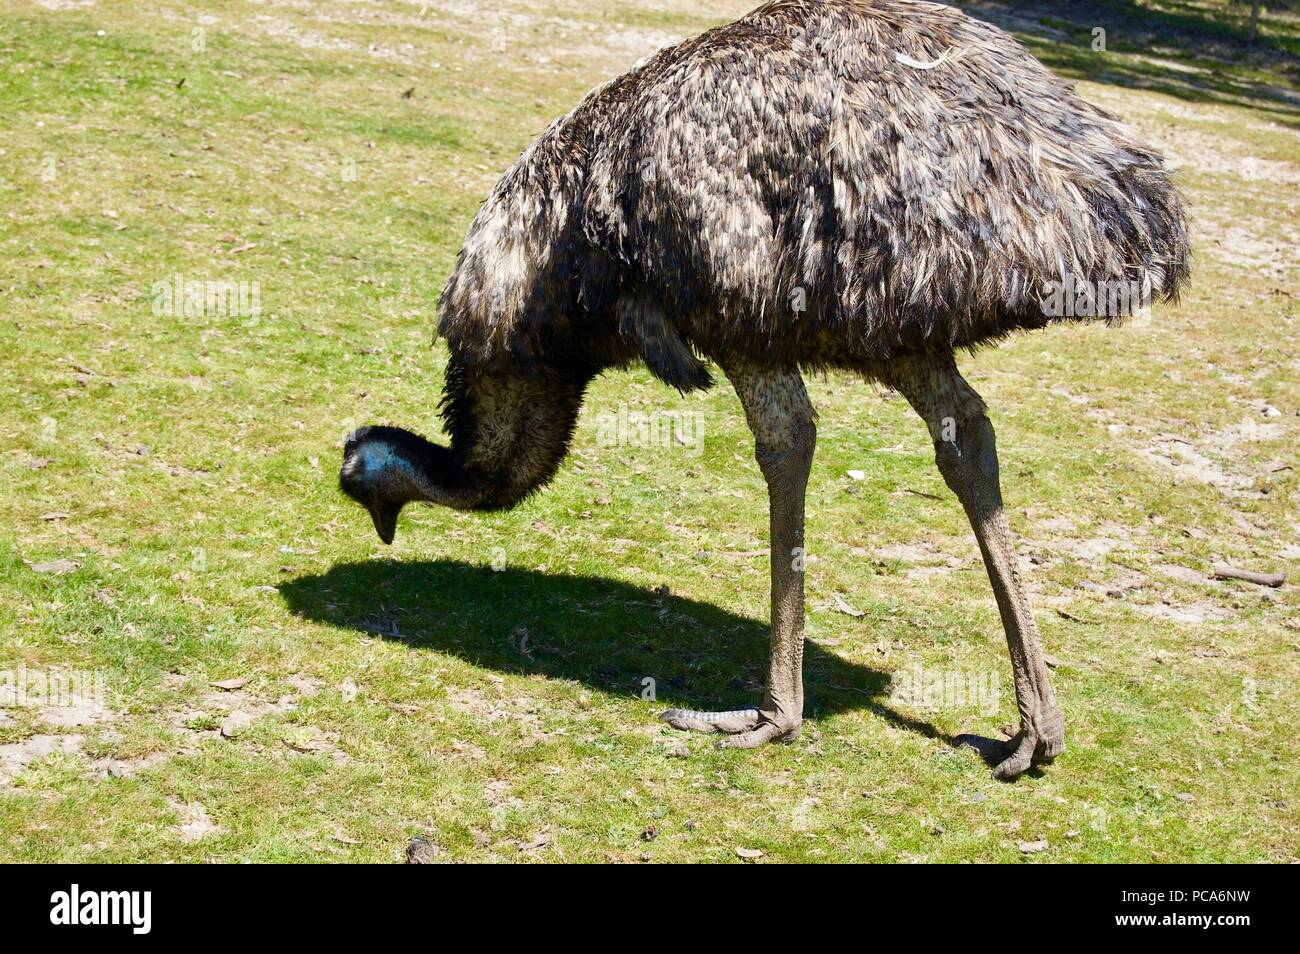 Australian Wildlife: Beautiful and curious brown emu close-up in a park in Victoria (Australia) close to Melbourne Stock Photo